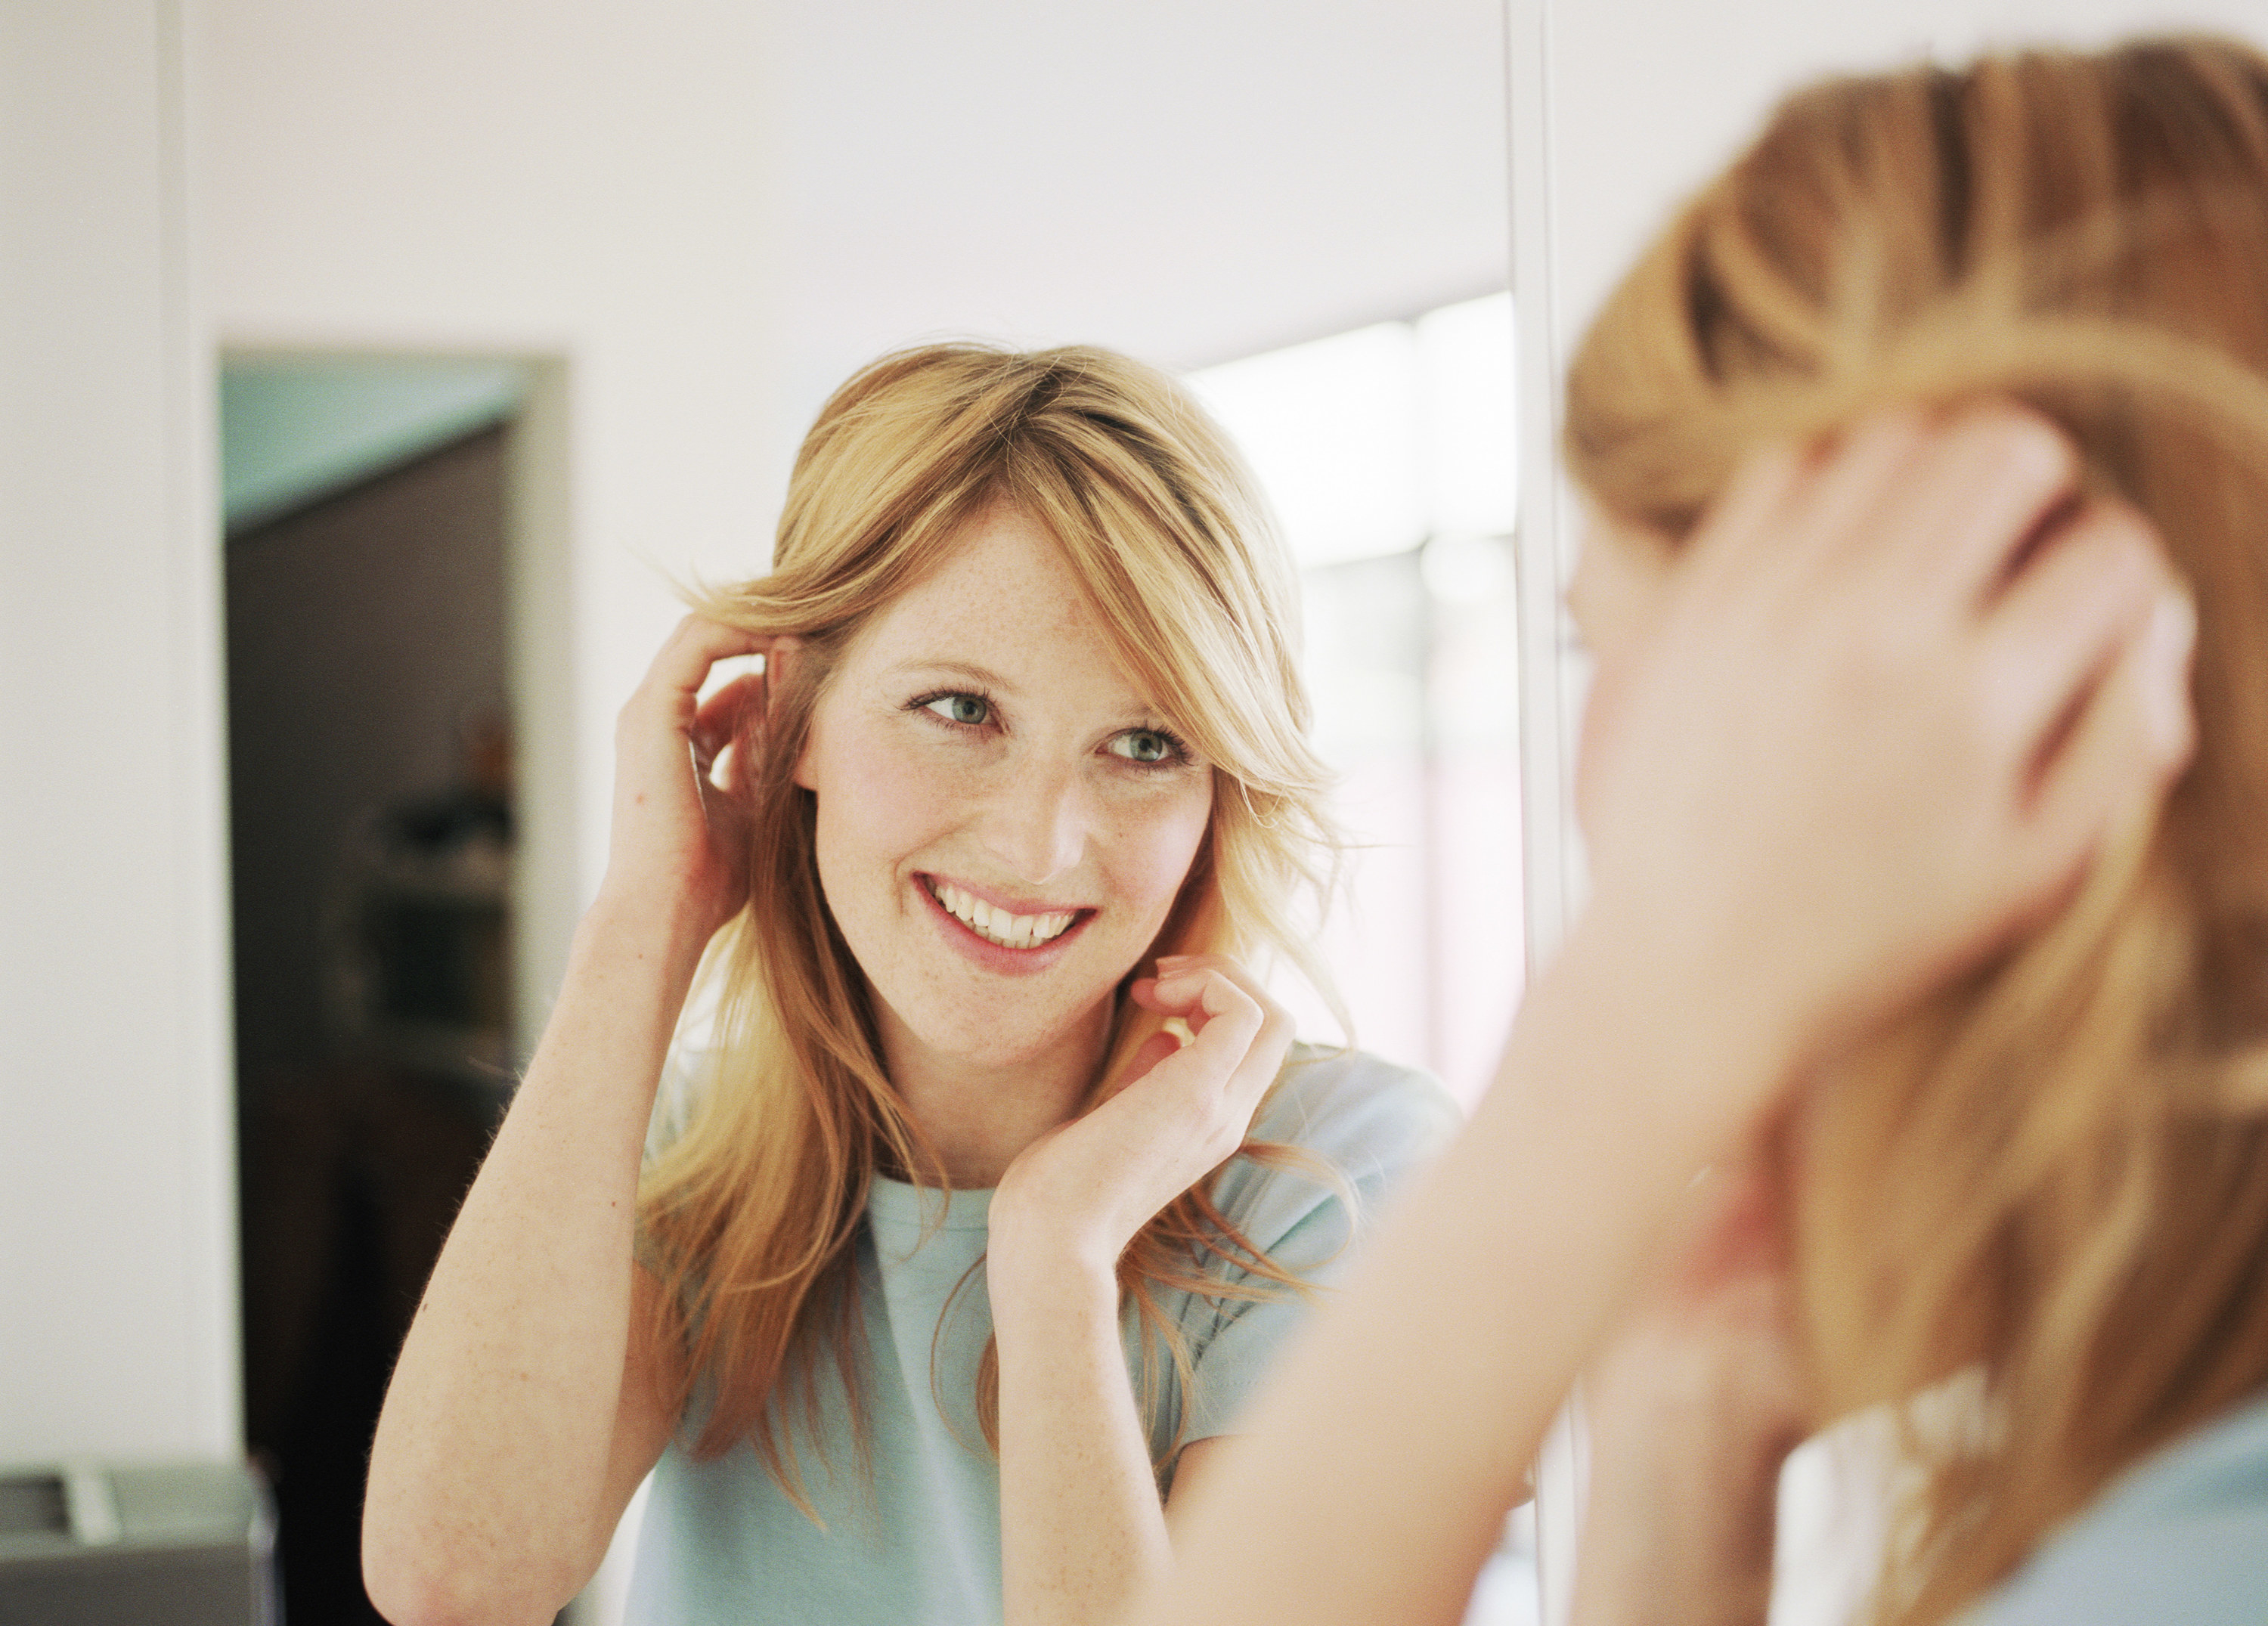 A woman smiles as she stares at herself in the mirror